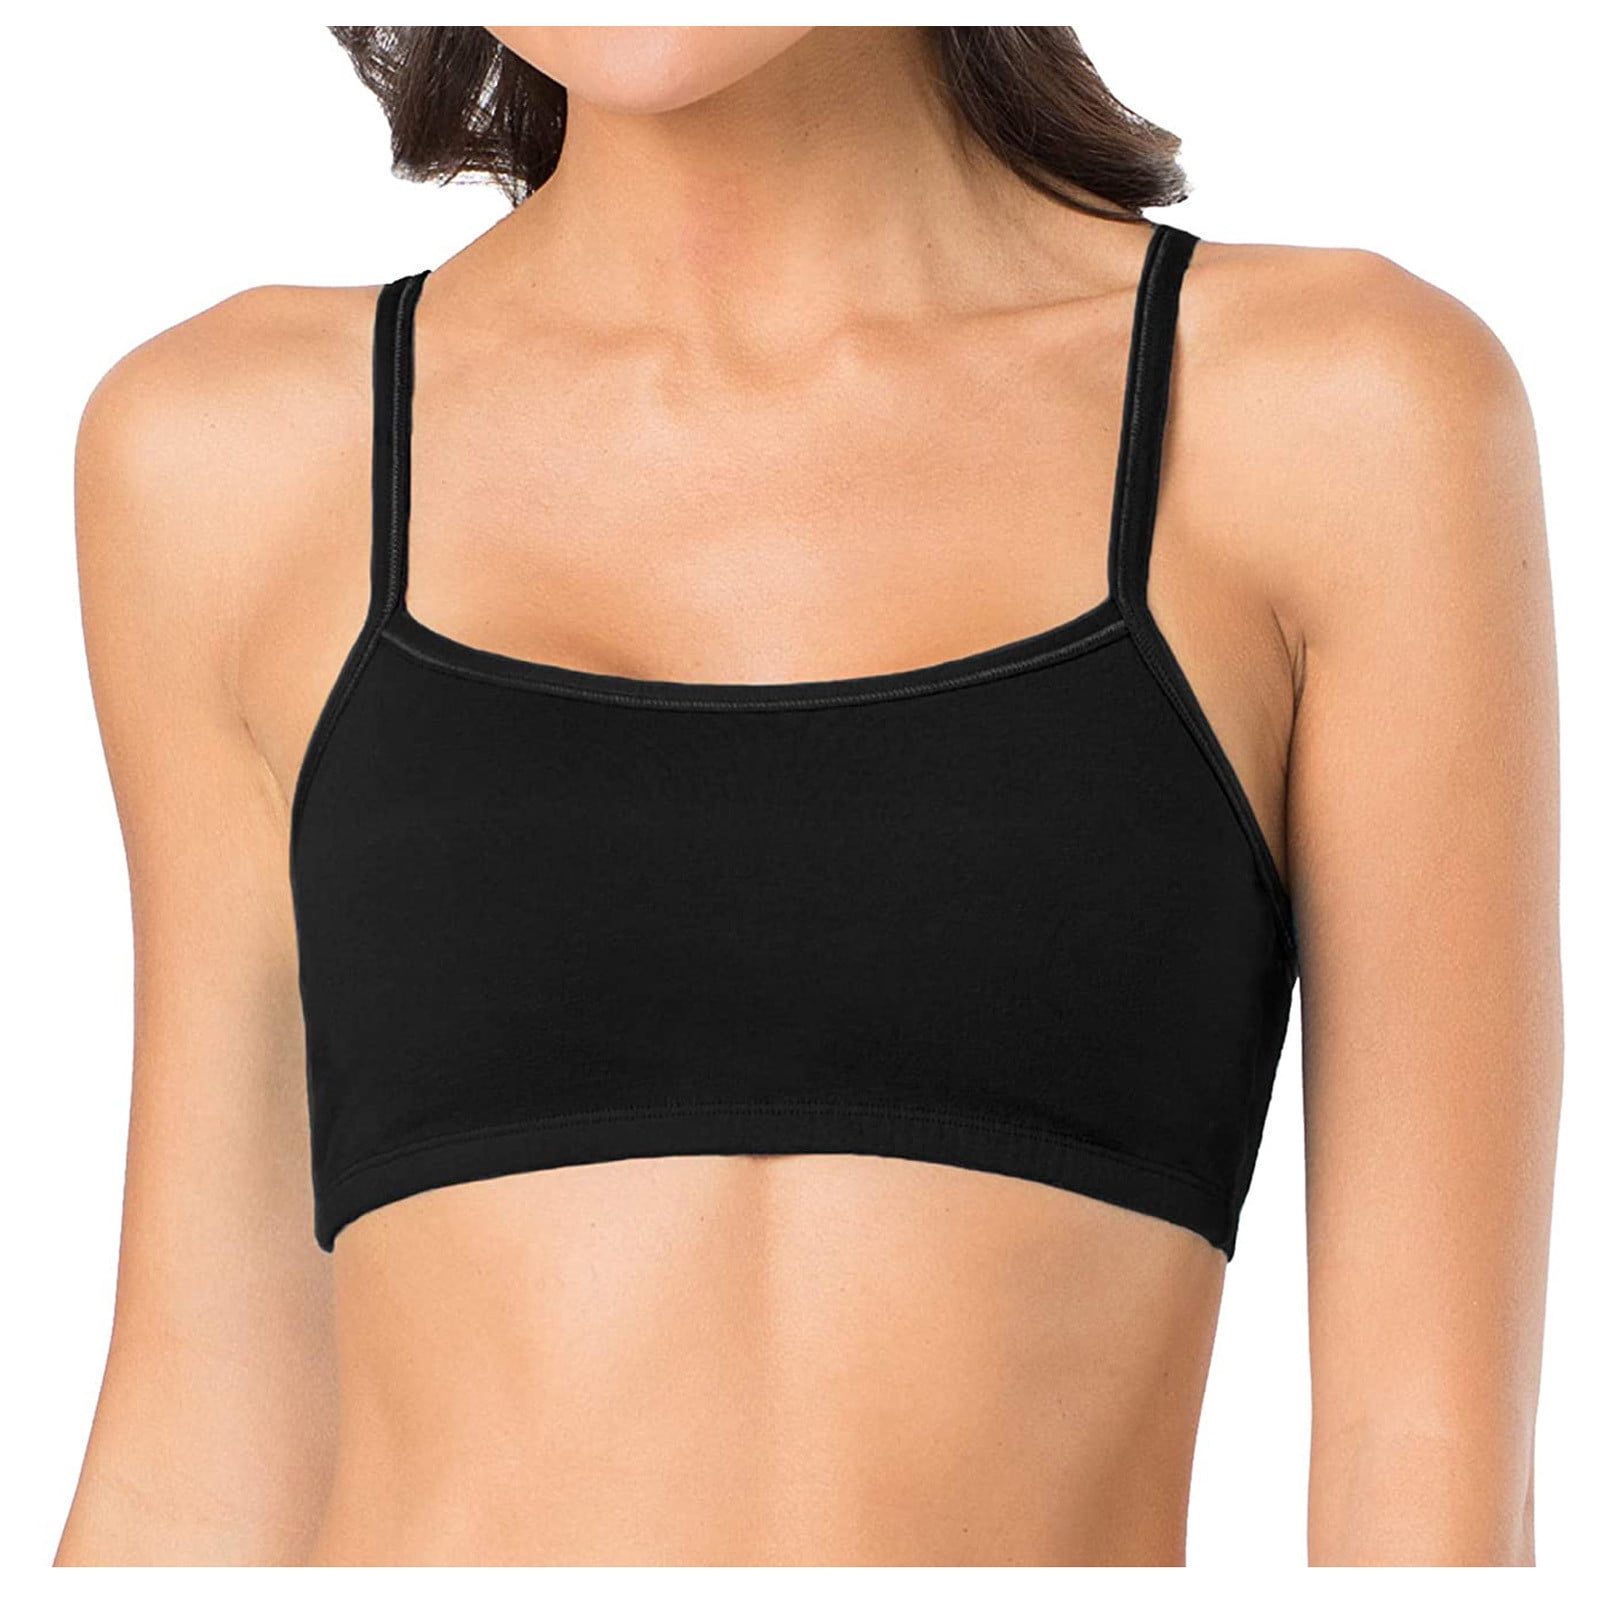 APEXFWDT Women's Workout Bandeau Sports Bras Taining Fitness